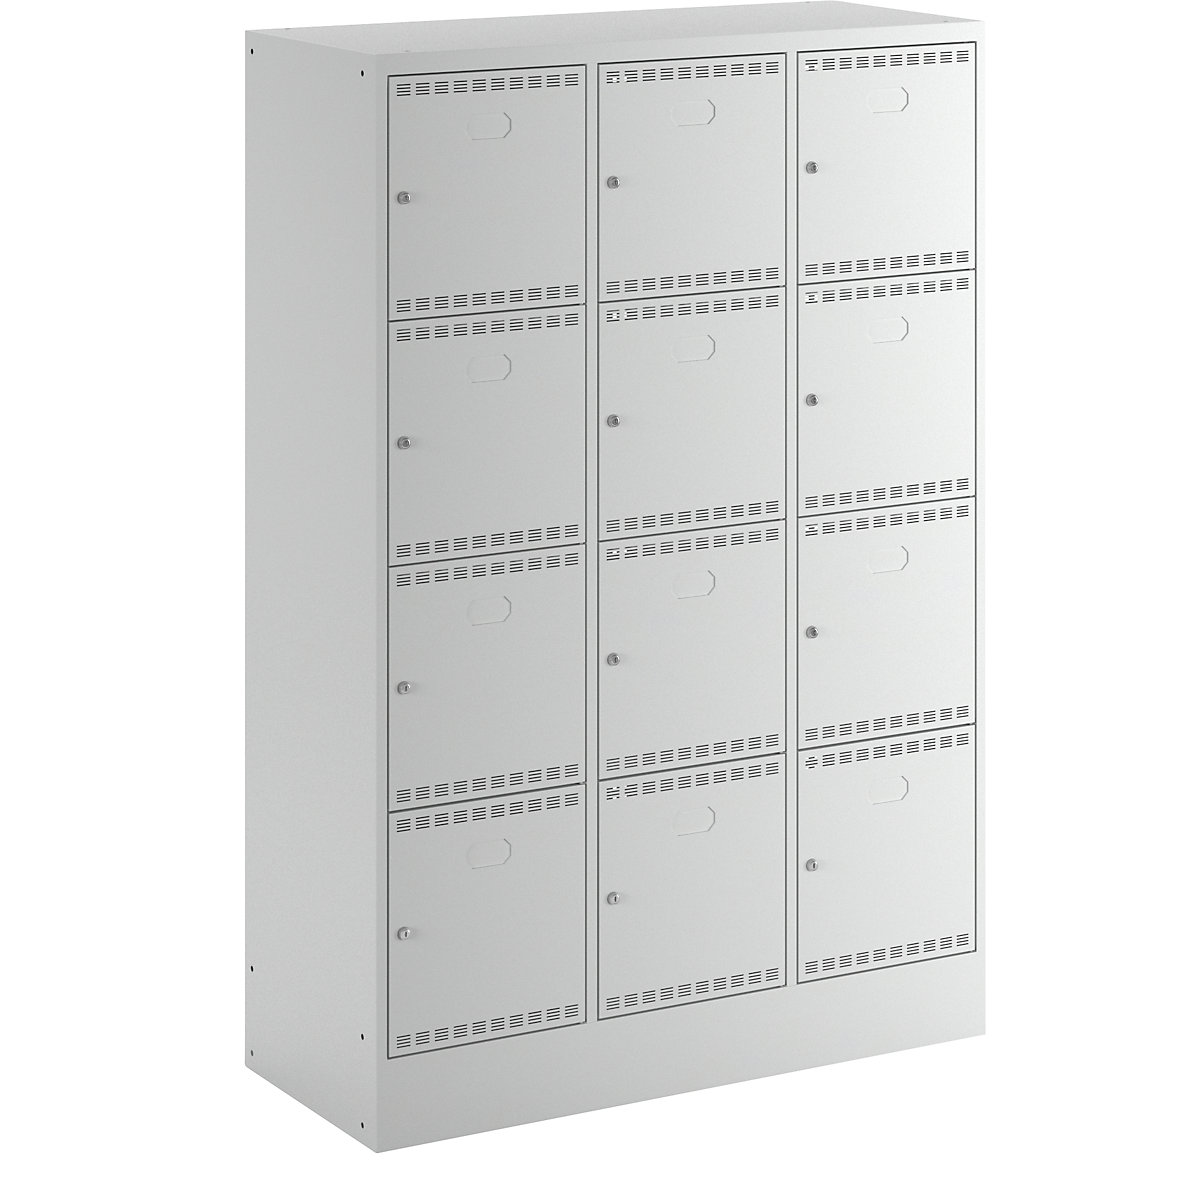 Battery charging cabinet with lockable compartments - LISTA